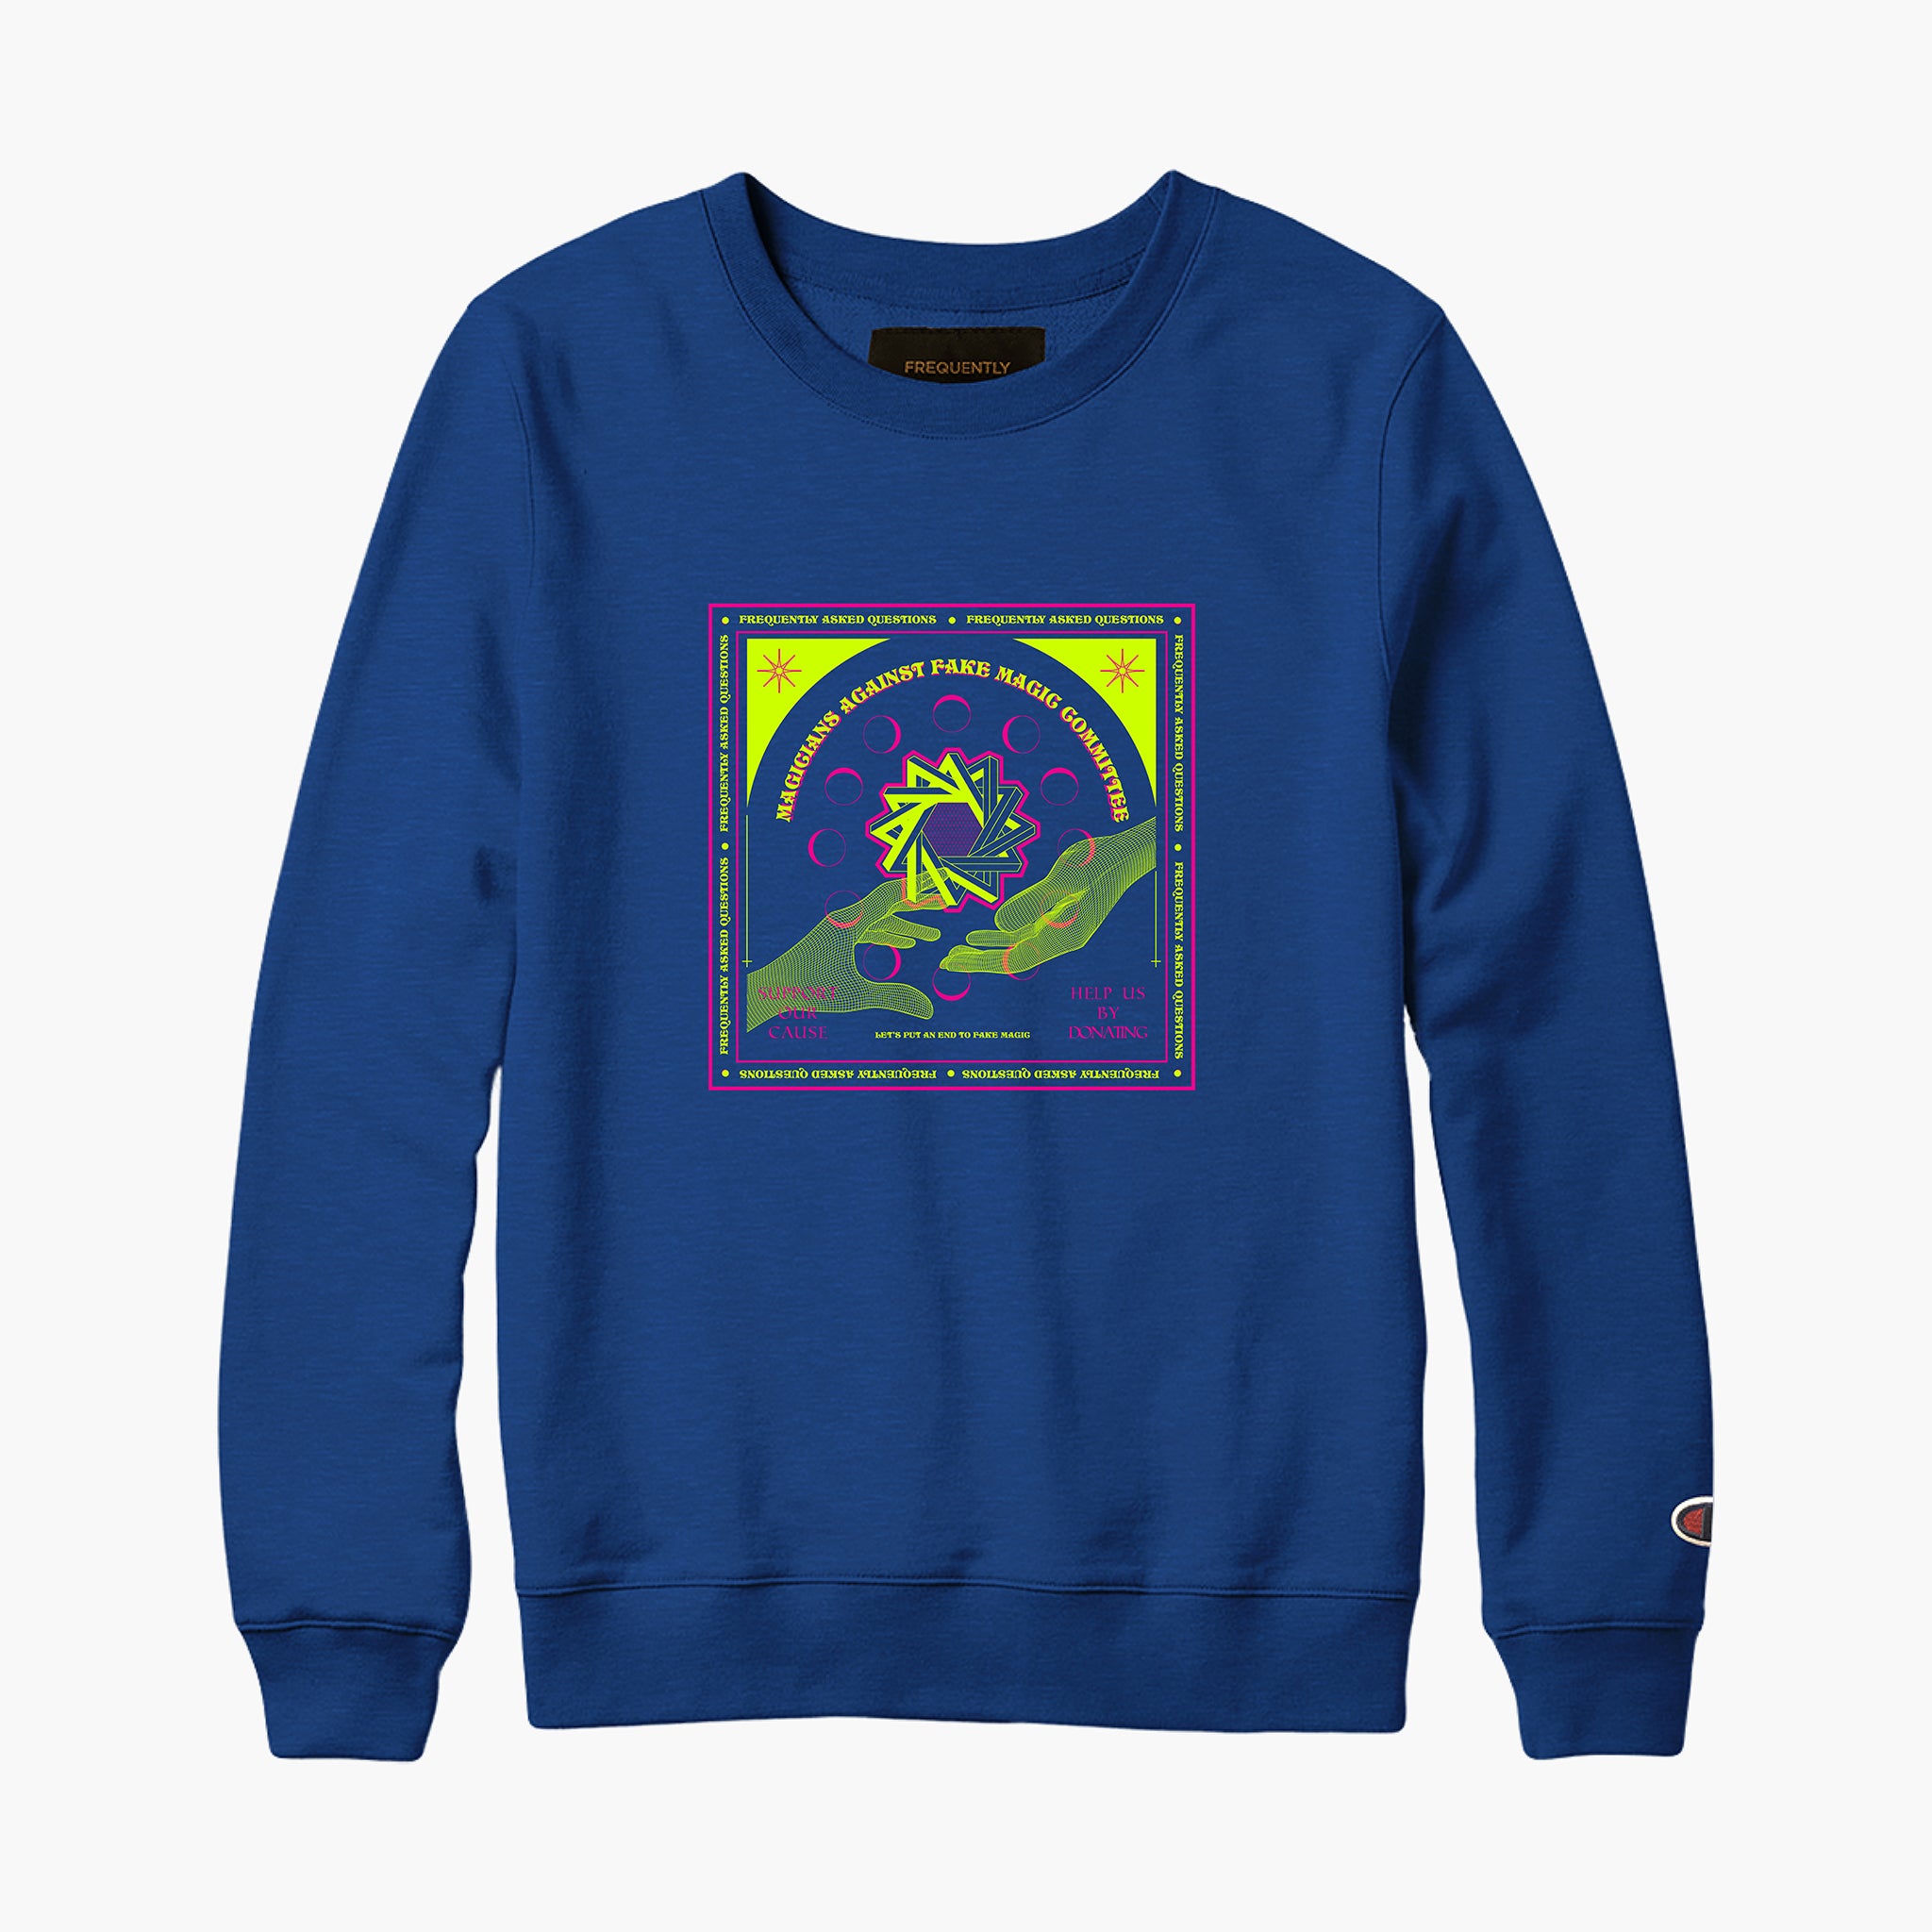 Magicians Committee Sweatshirt - Frequently Asked Questions